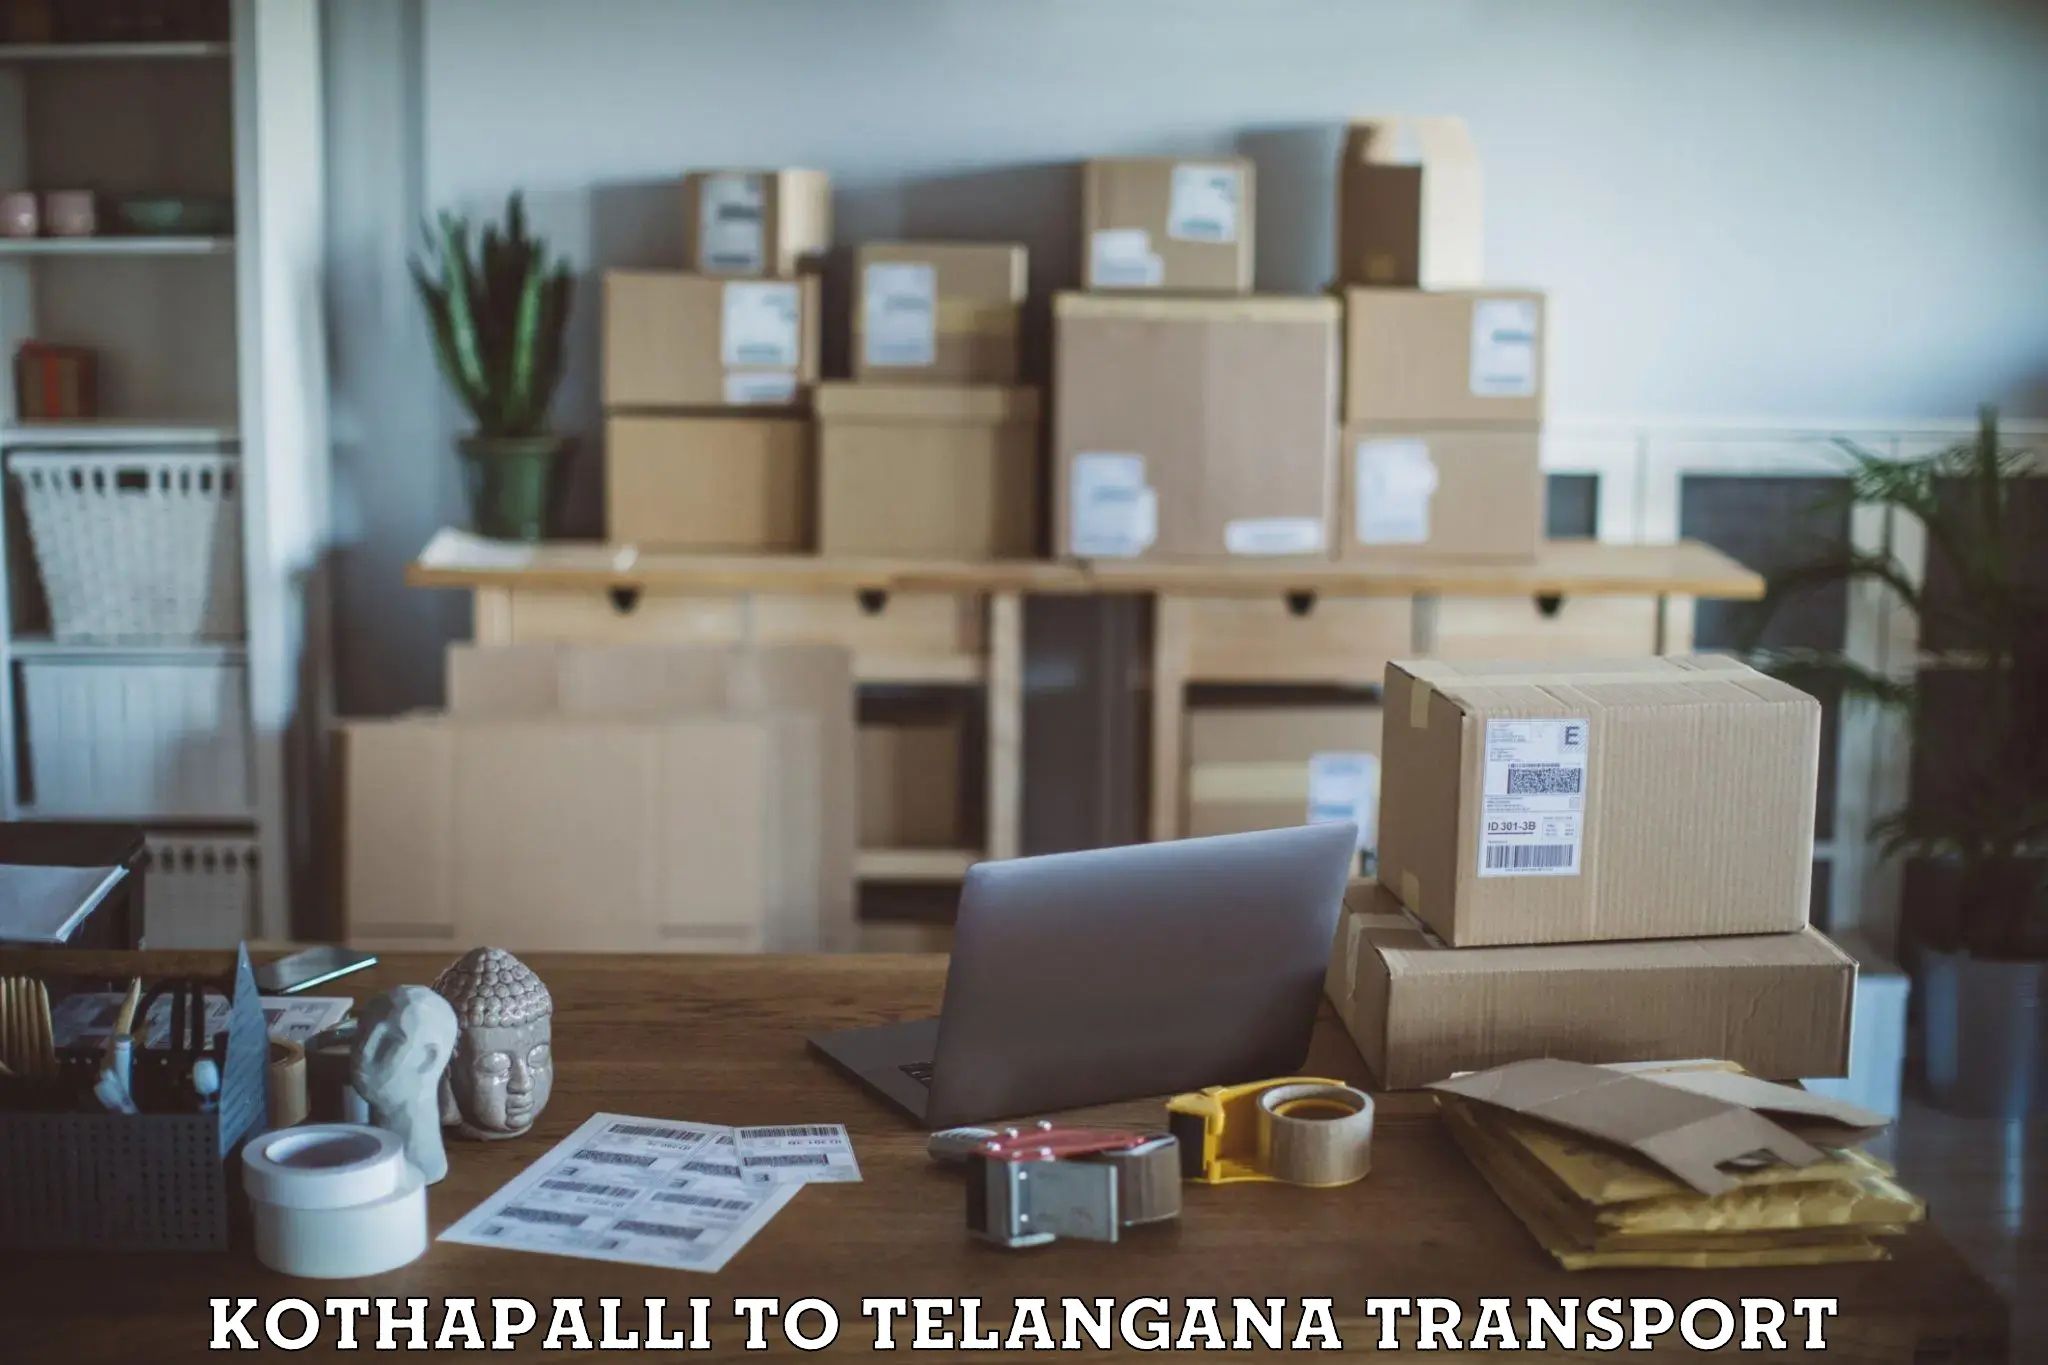 Express transport services Kothapalli to IIT Hyderabad